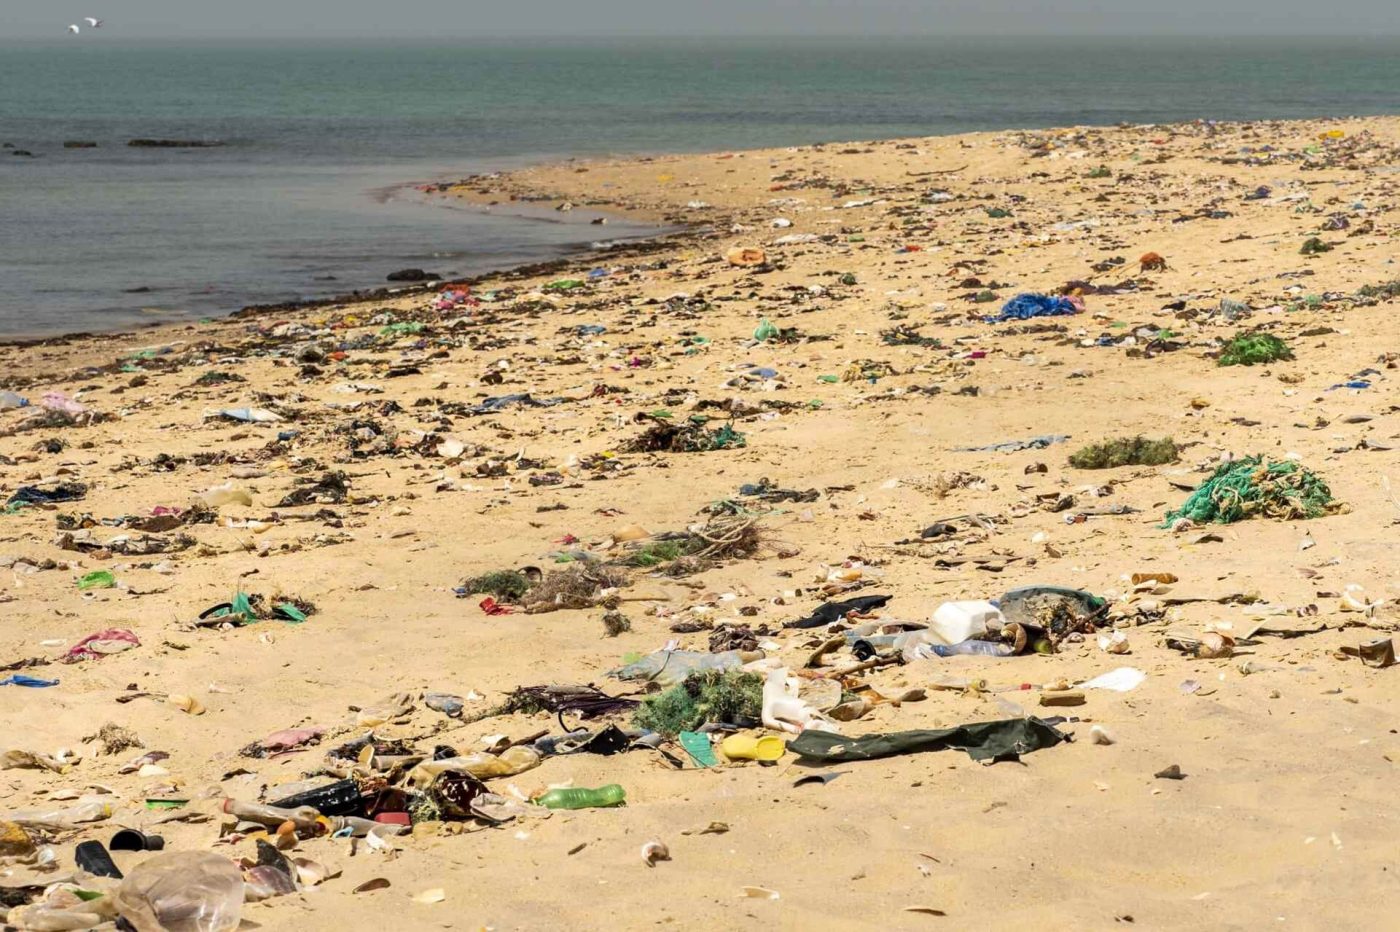 How to Dispose of Sanitary Waste – Trash on Beach